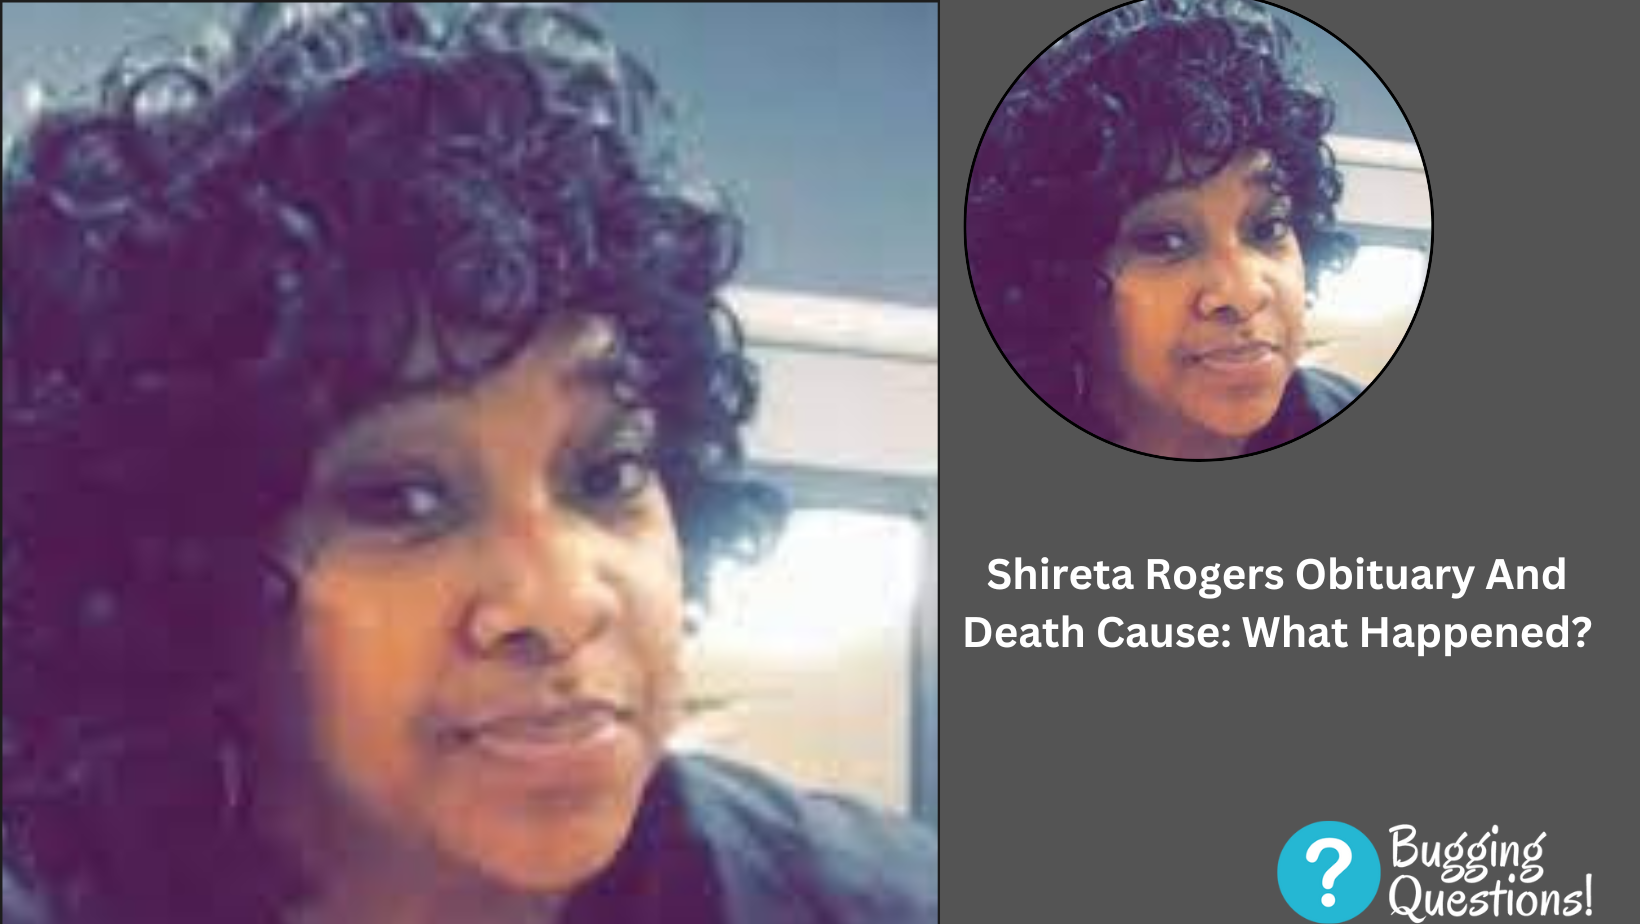 Shireta Rogers Obituary And Death Cause: What Happened?